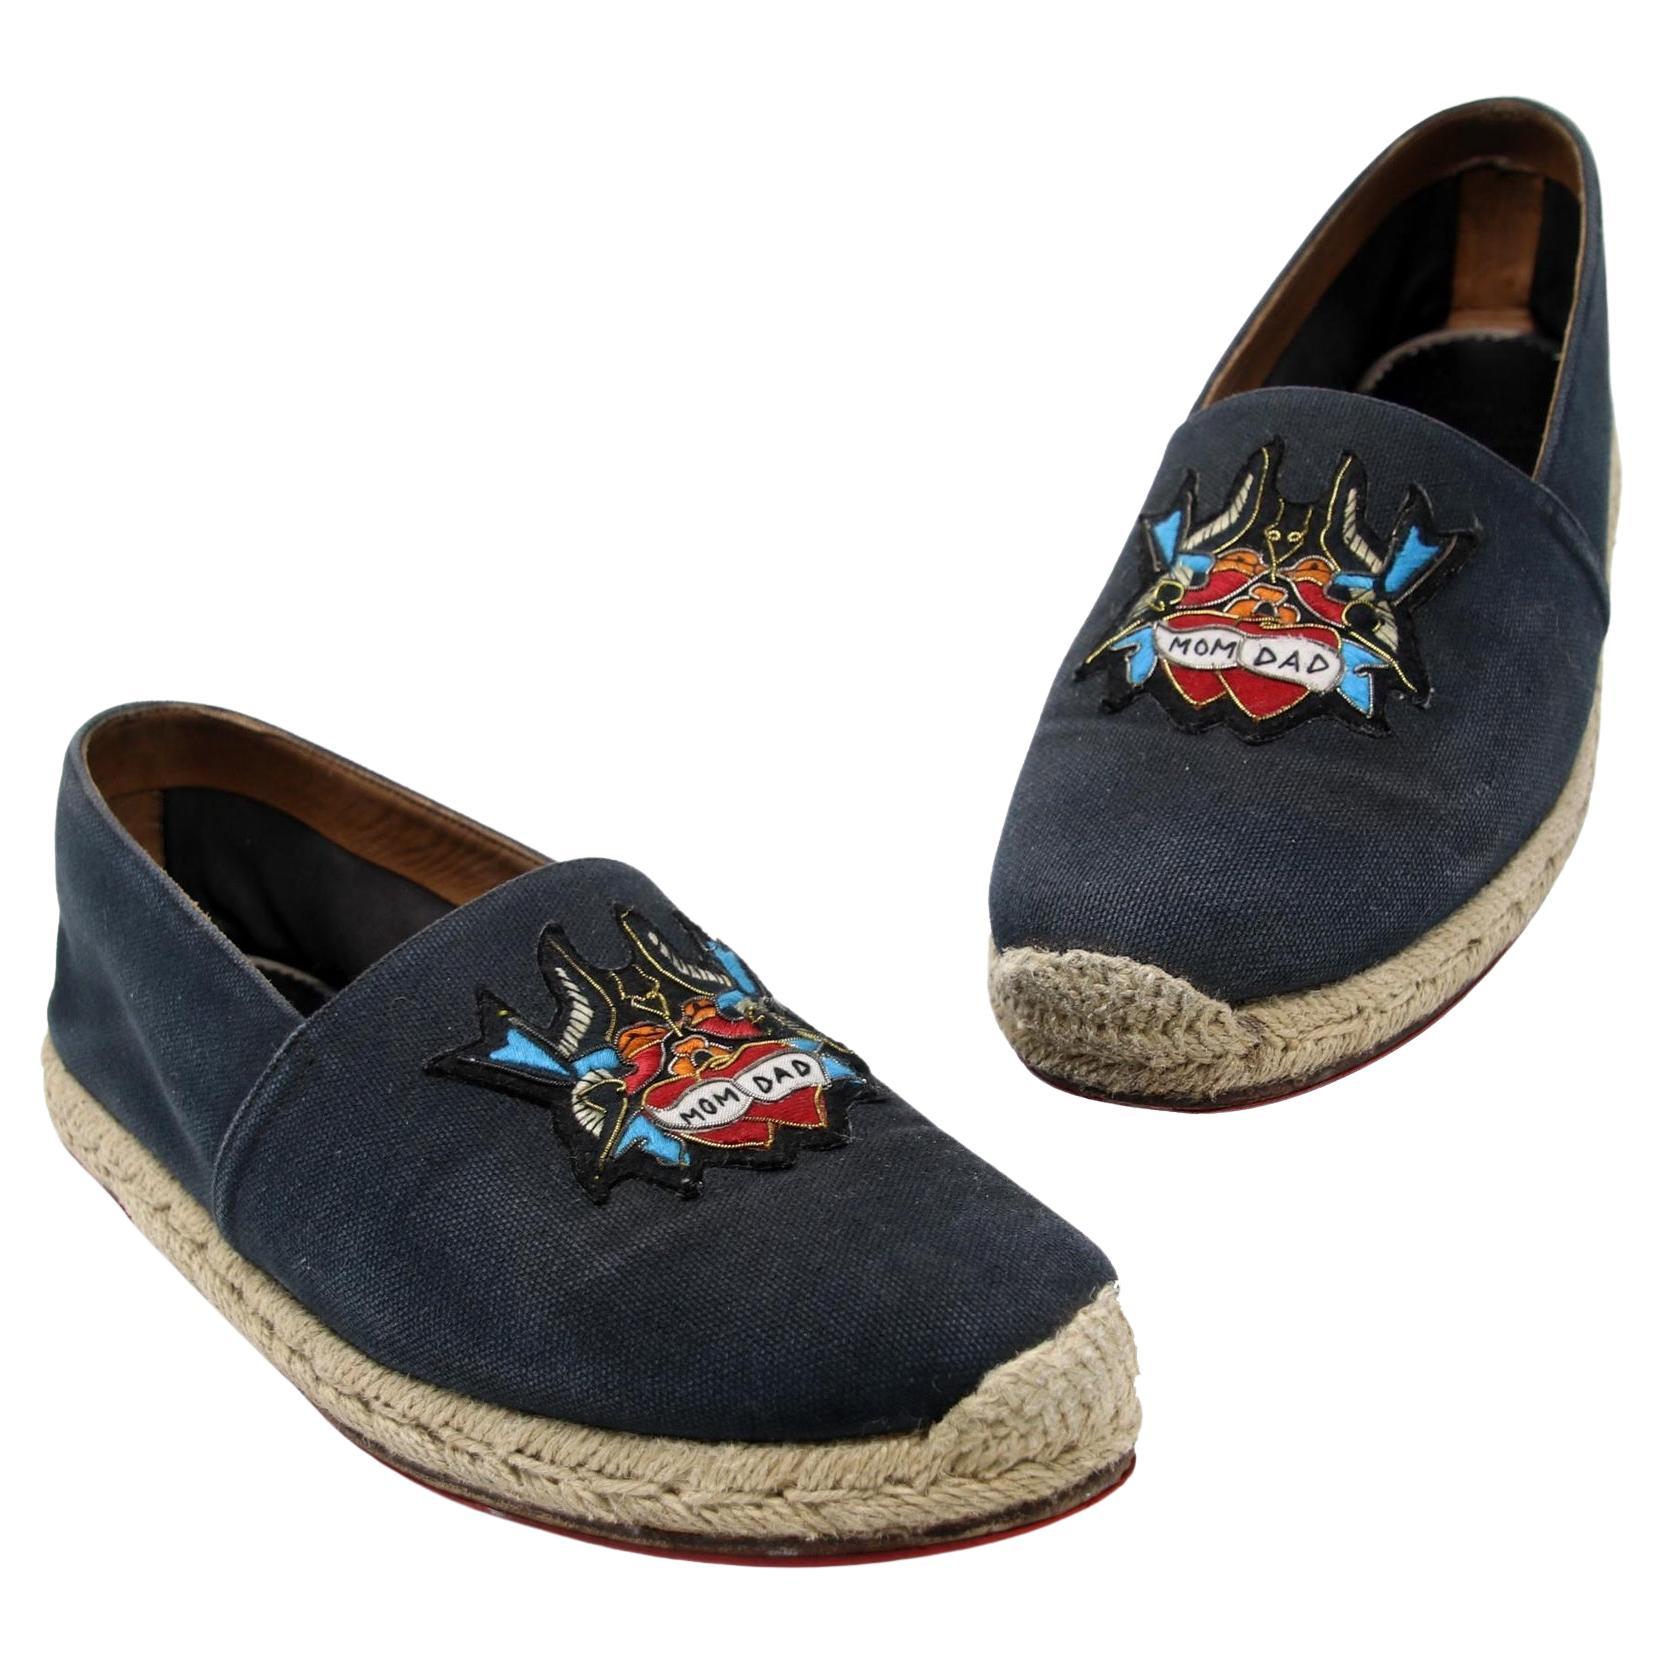 Christian Louboutin Sparrow Birds 'Mom & Dad' Tattoo Patch Espadrille Shoes